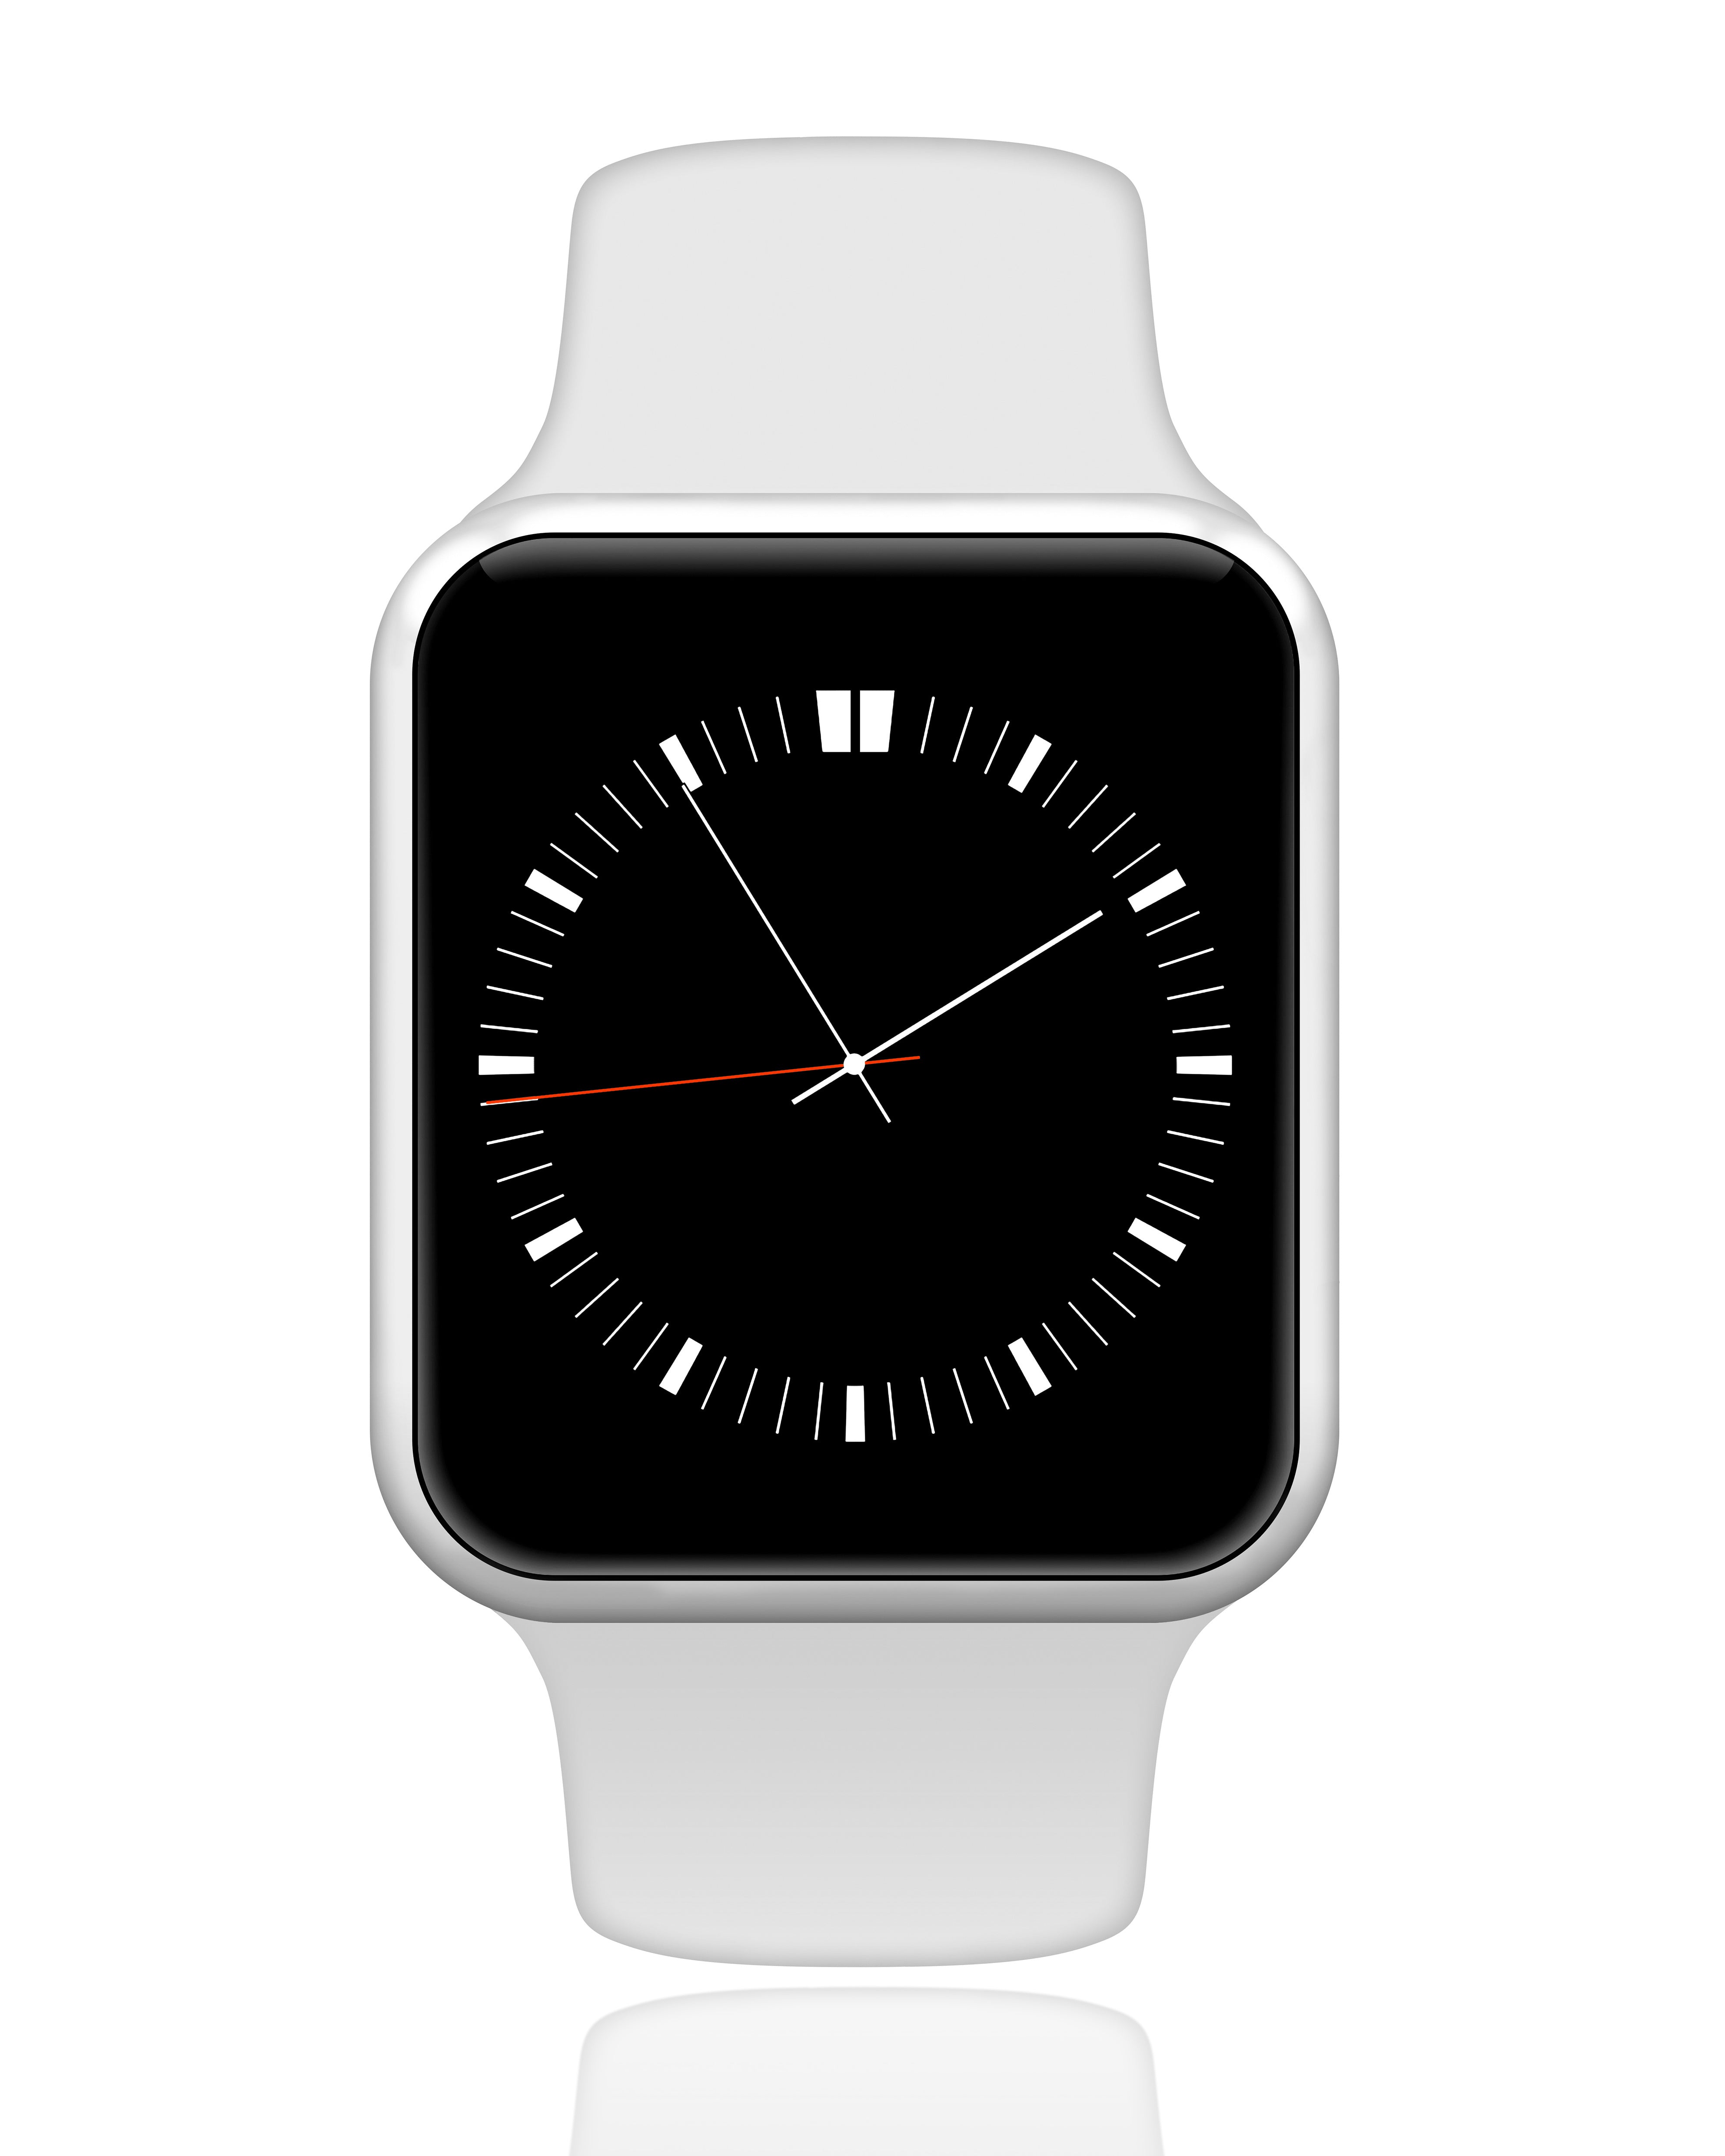 Why is Apple Now Making Titanium Watches?